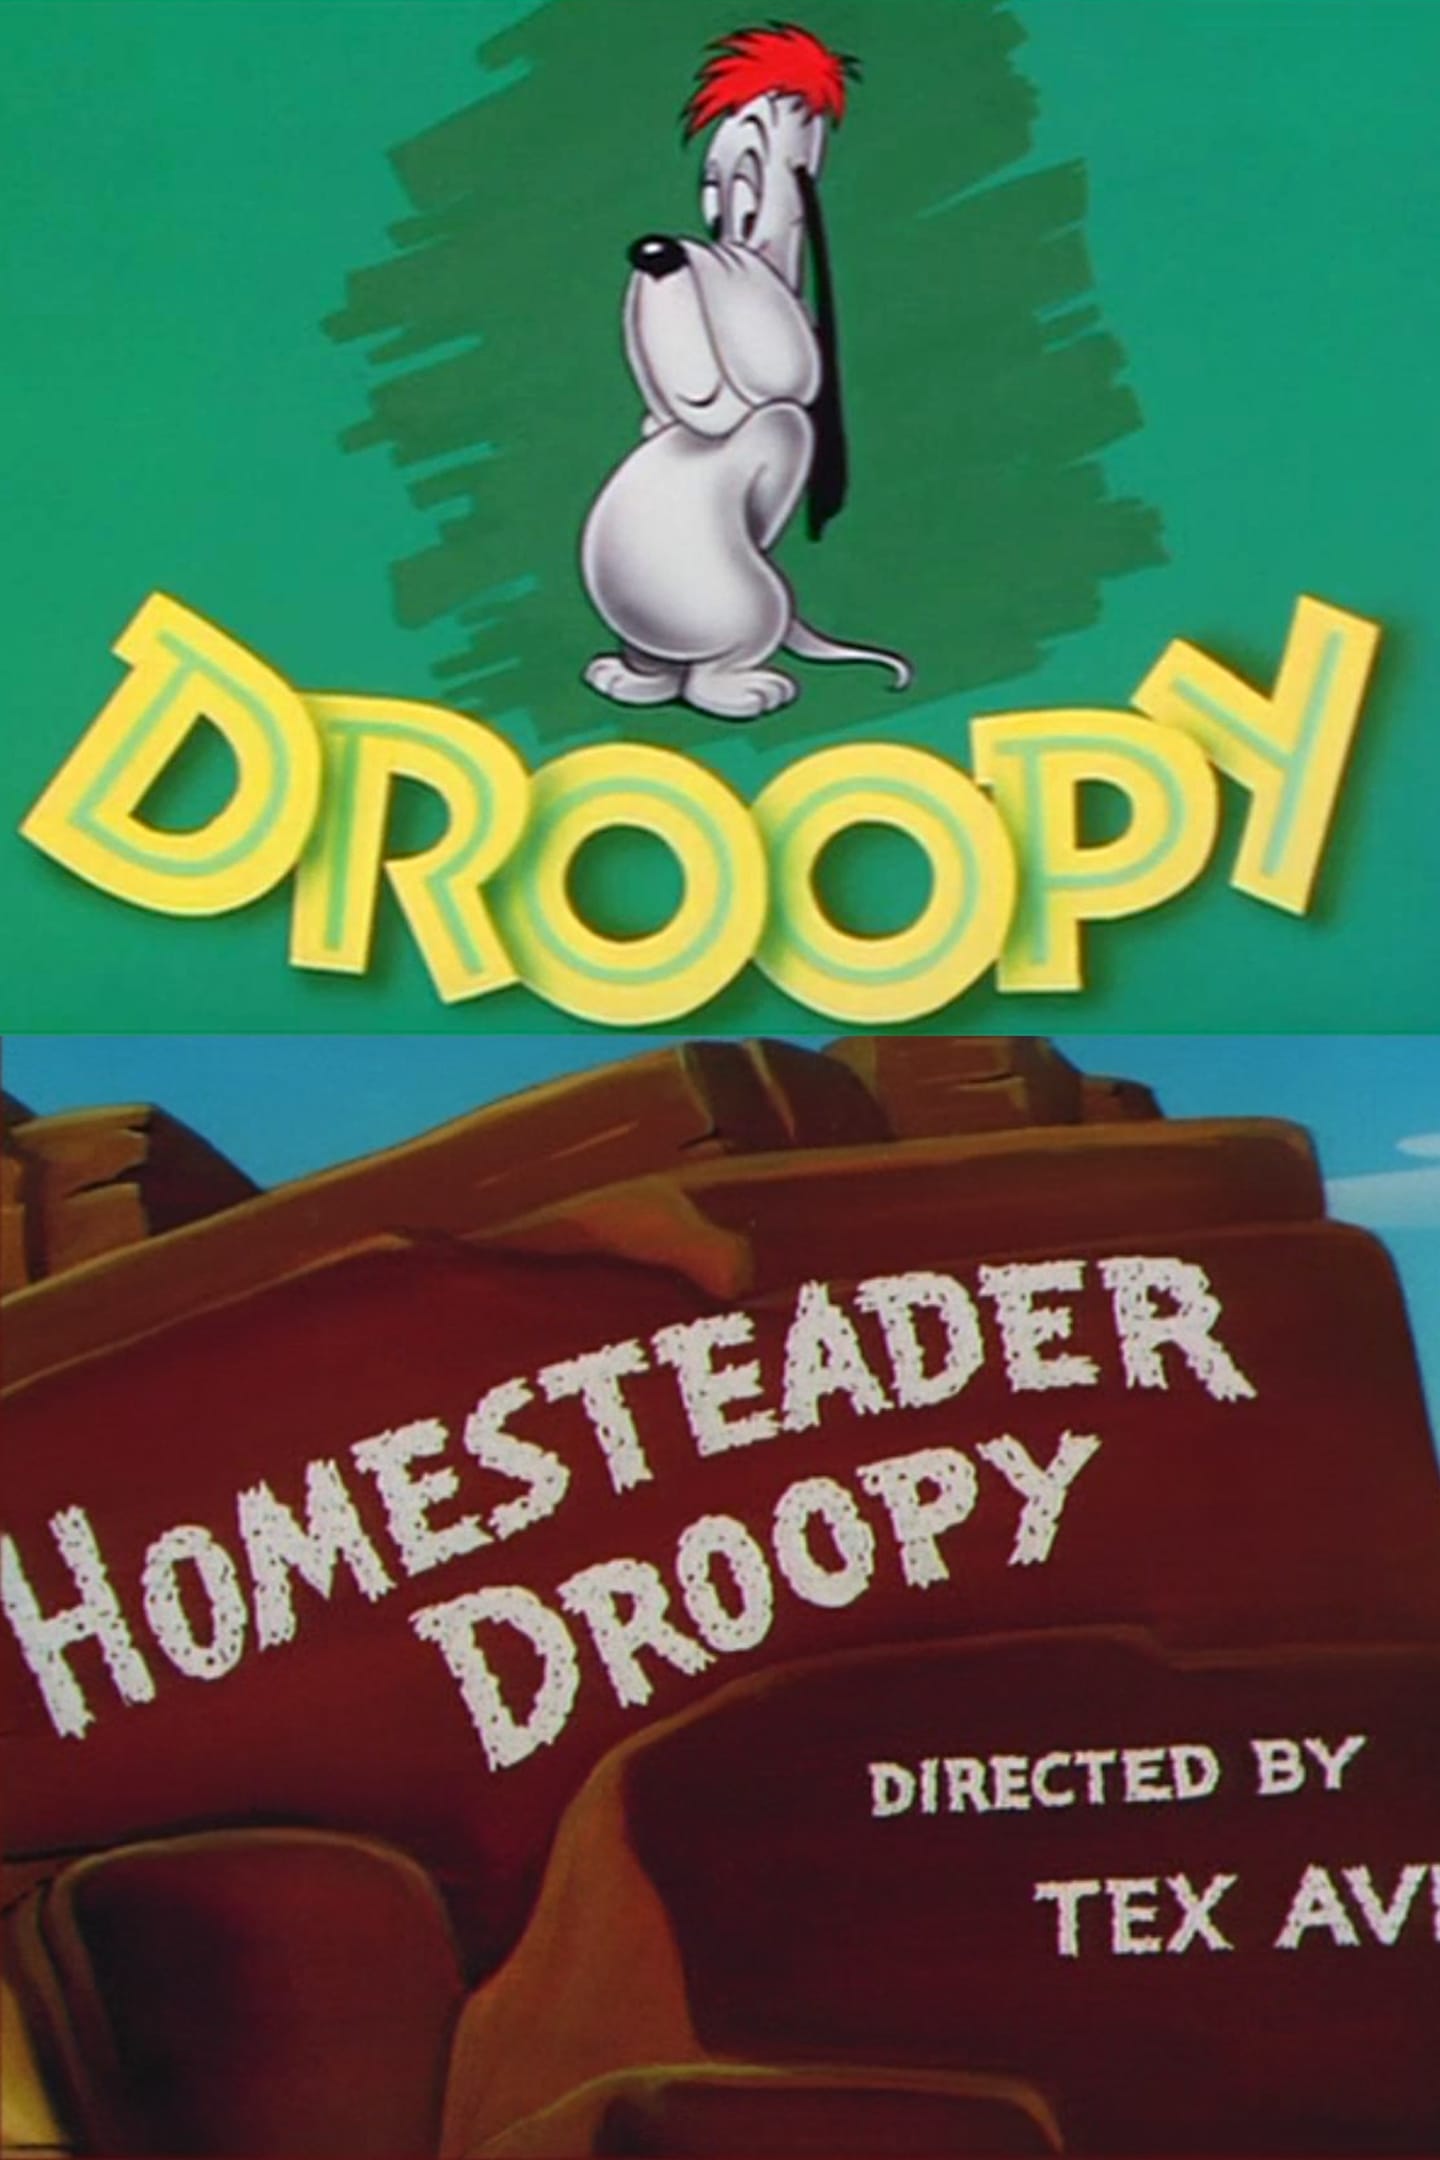 Homesteader Droopy (1954)